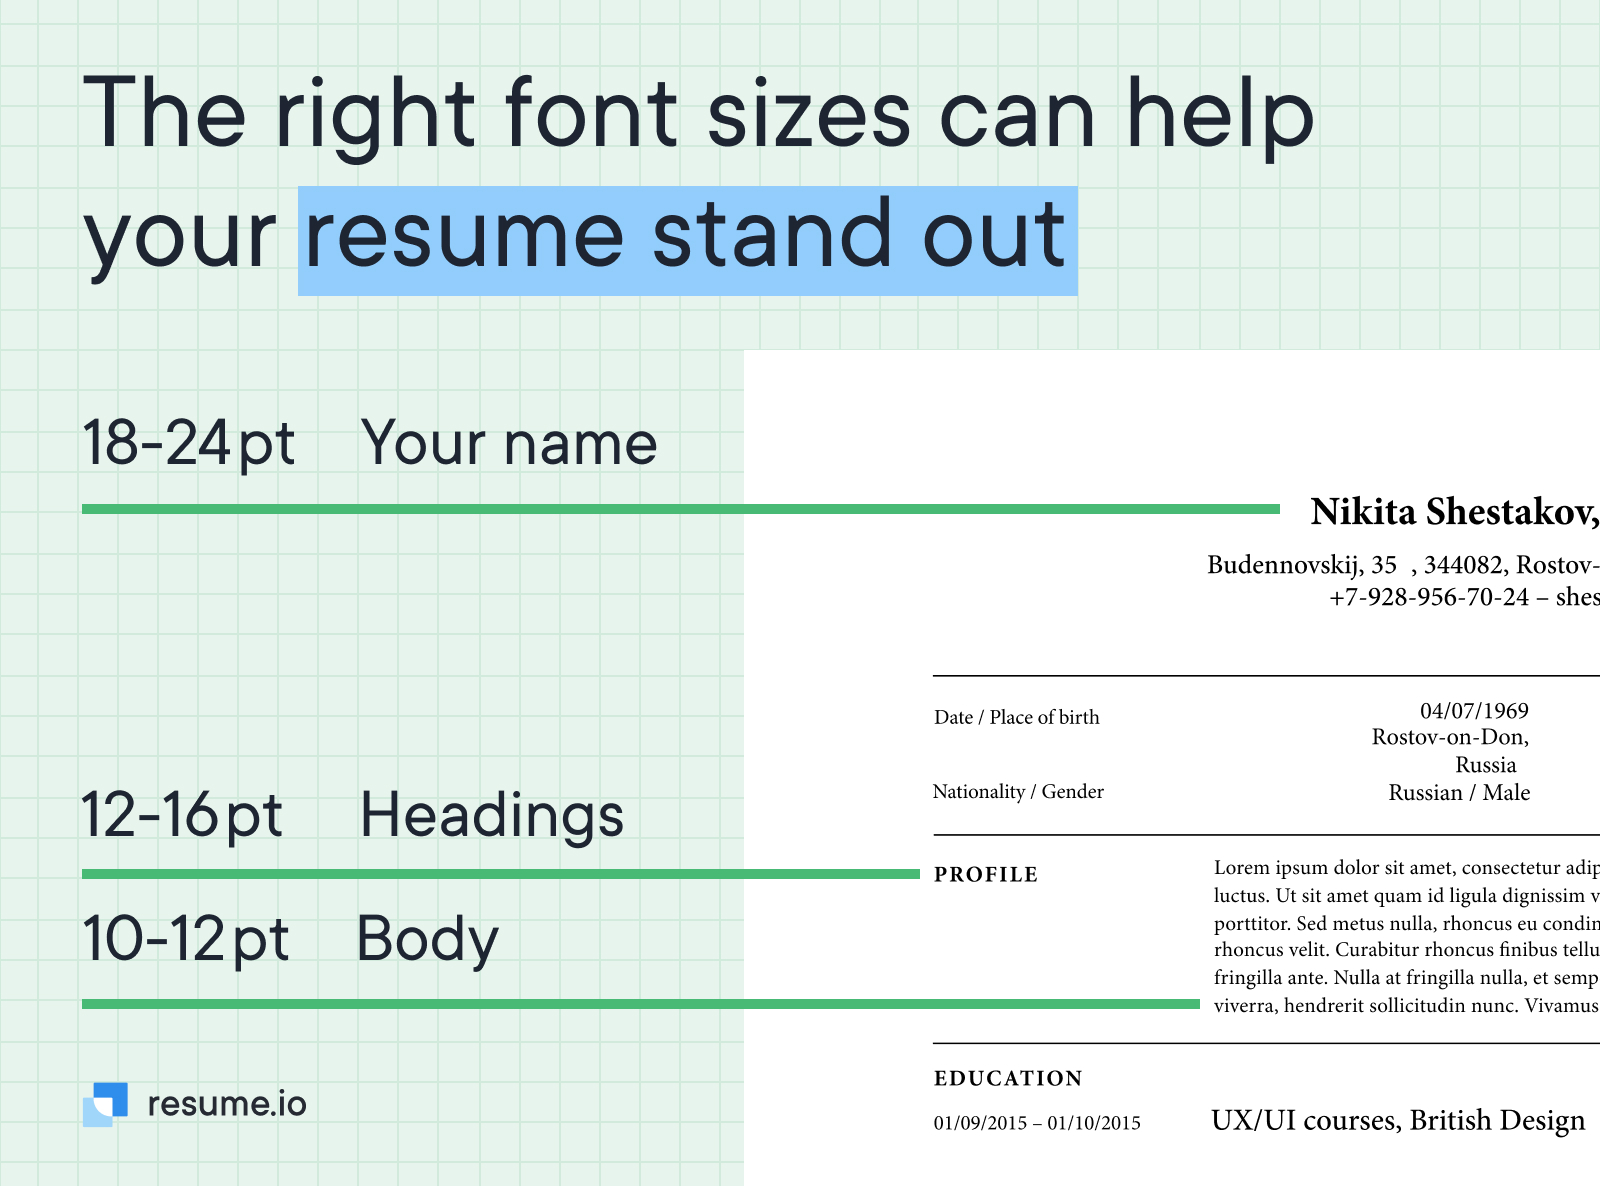 The right font sizes can help your resume stand out